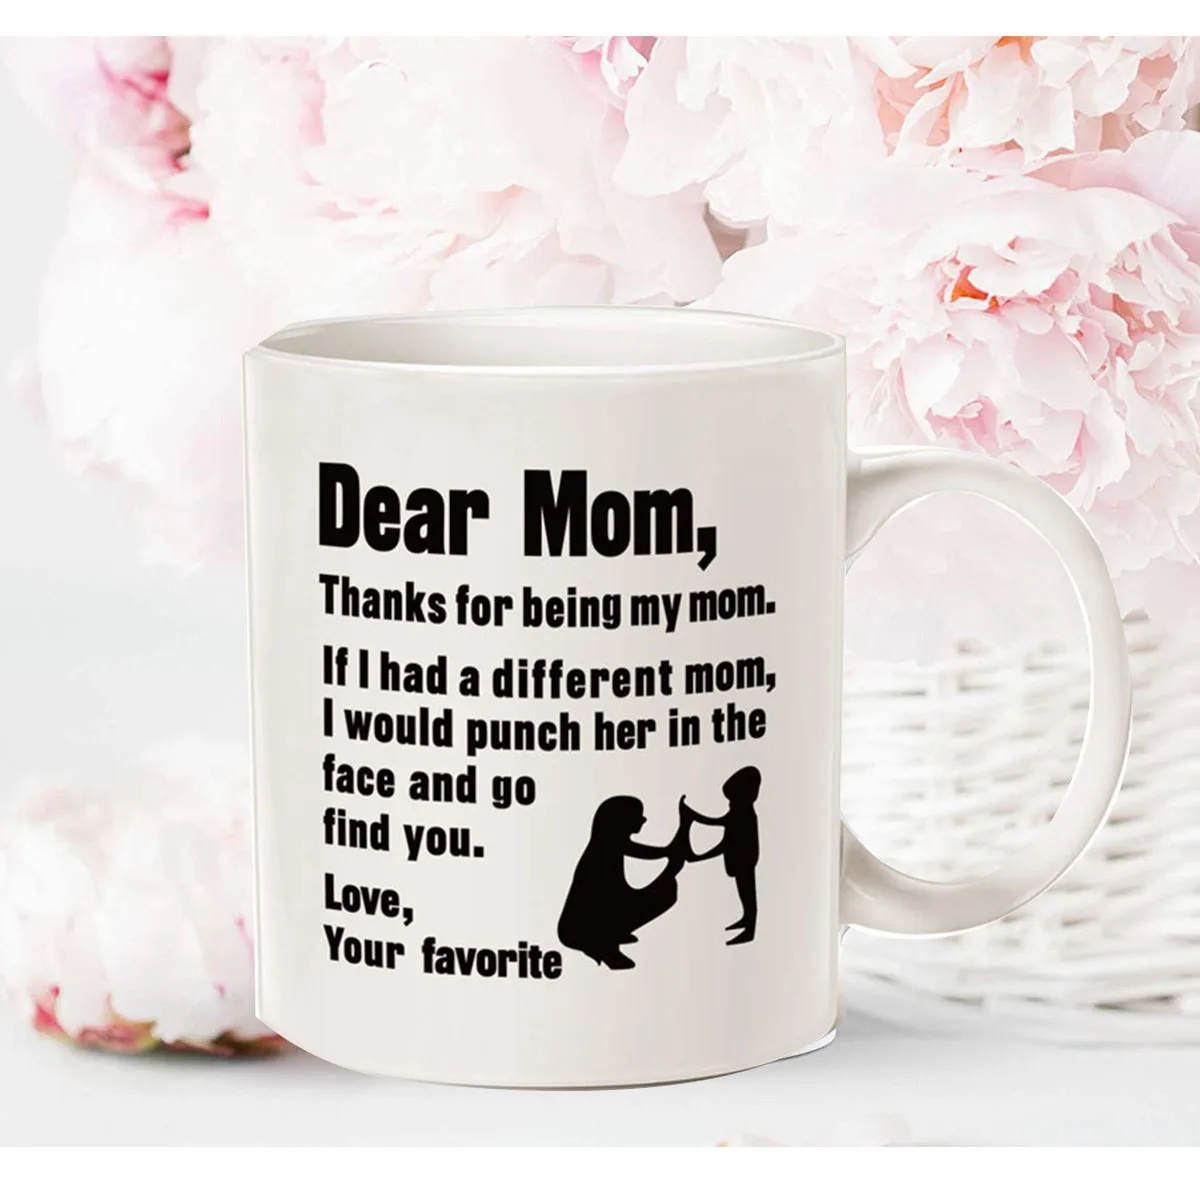 Details about   Thank You For Being My Wife Mug Mug732 Wife Gifts Mother's Day Gift Birthday 